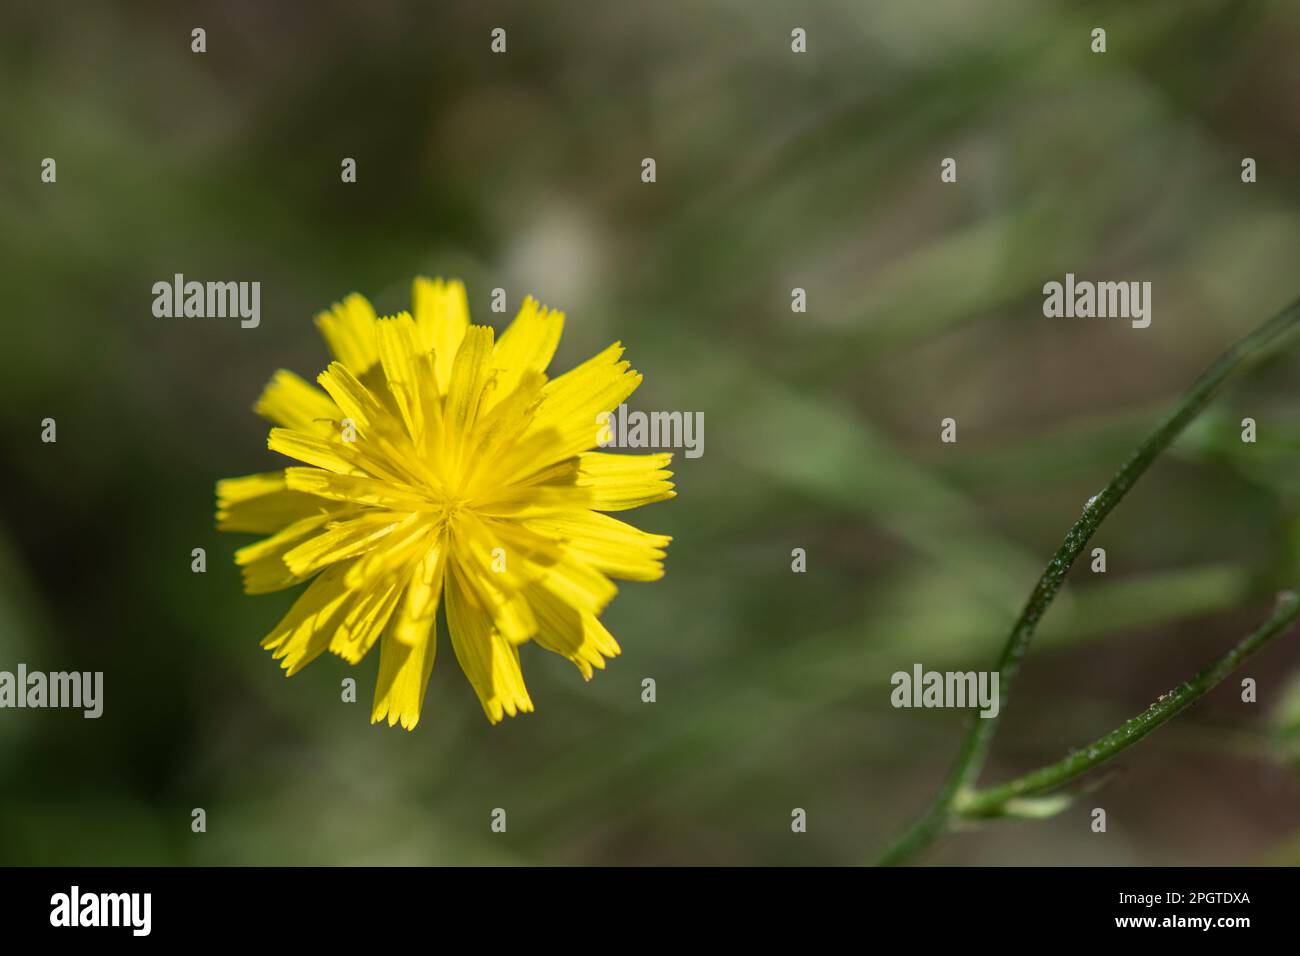 Crepis capillaris, smooth, hawksbeard flower, often considered a weed, growing beside lawn. Stock Photo